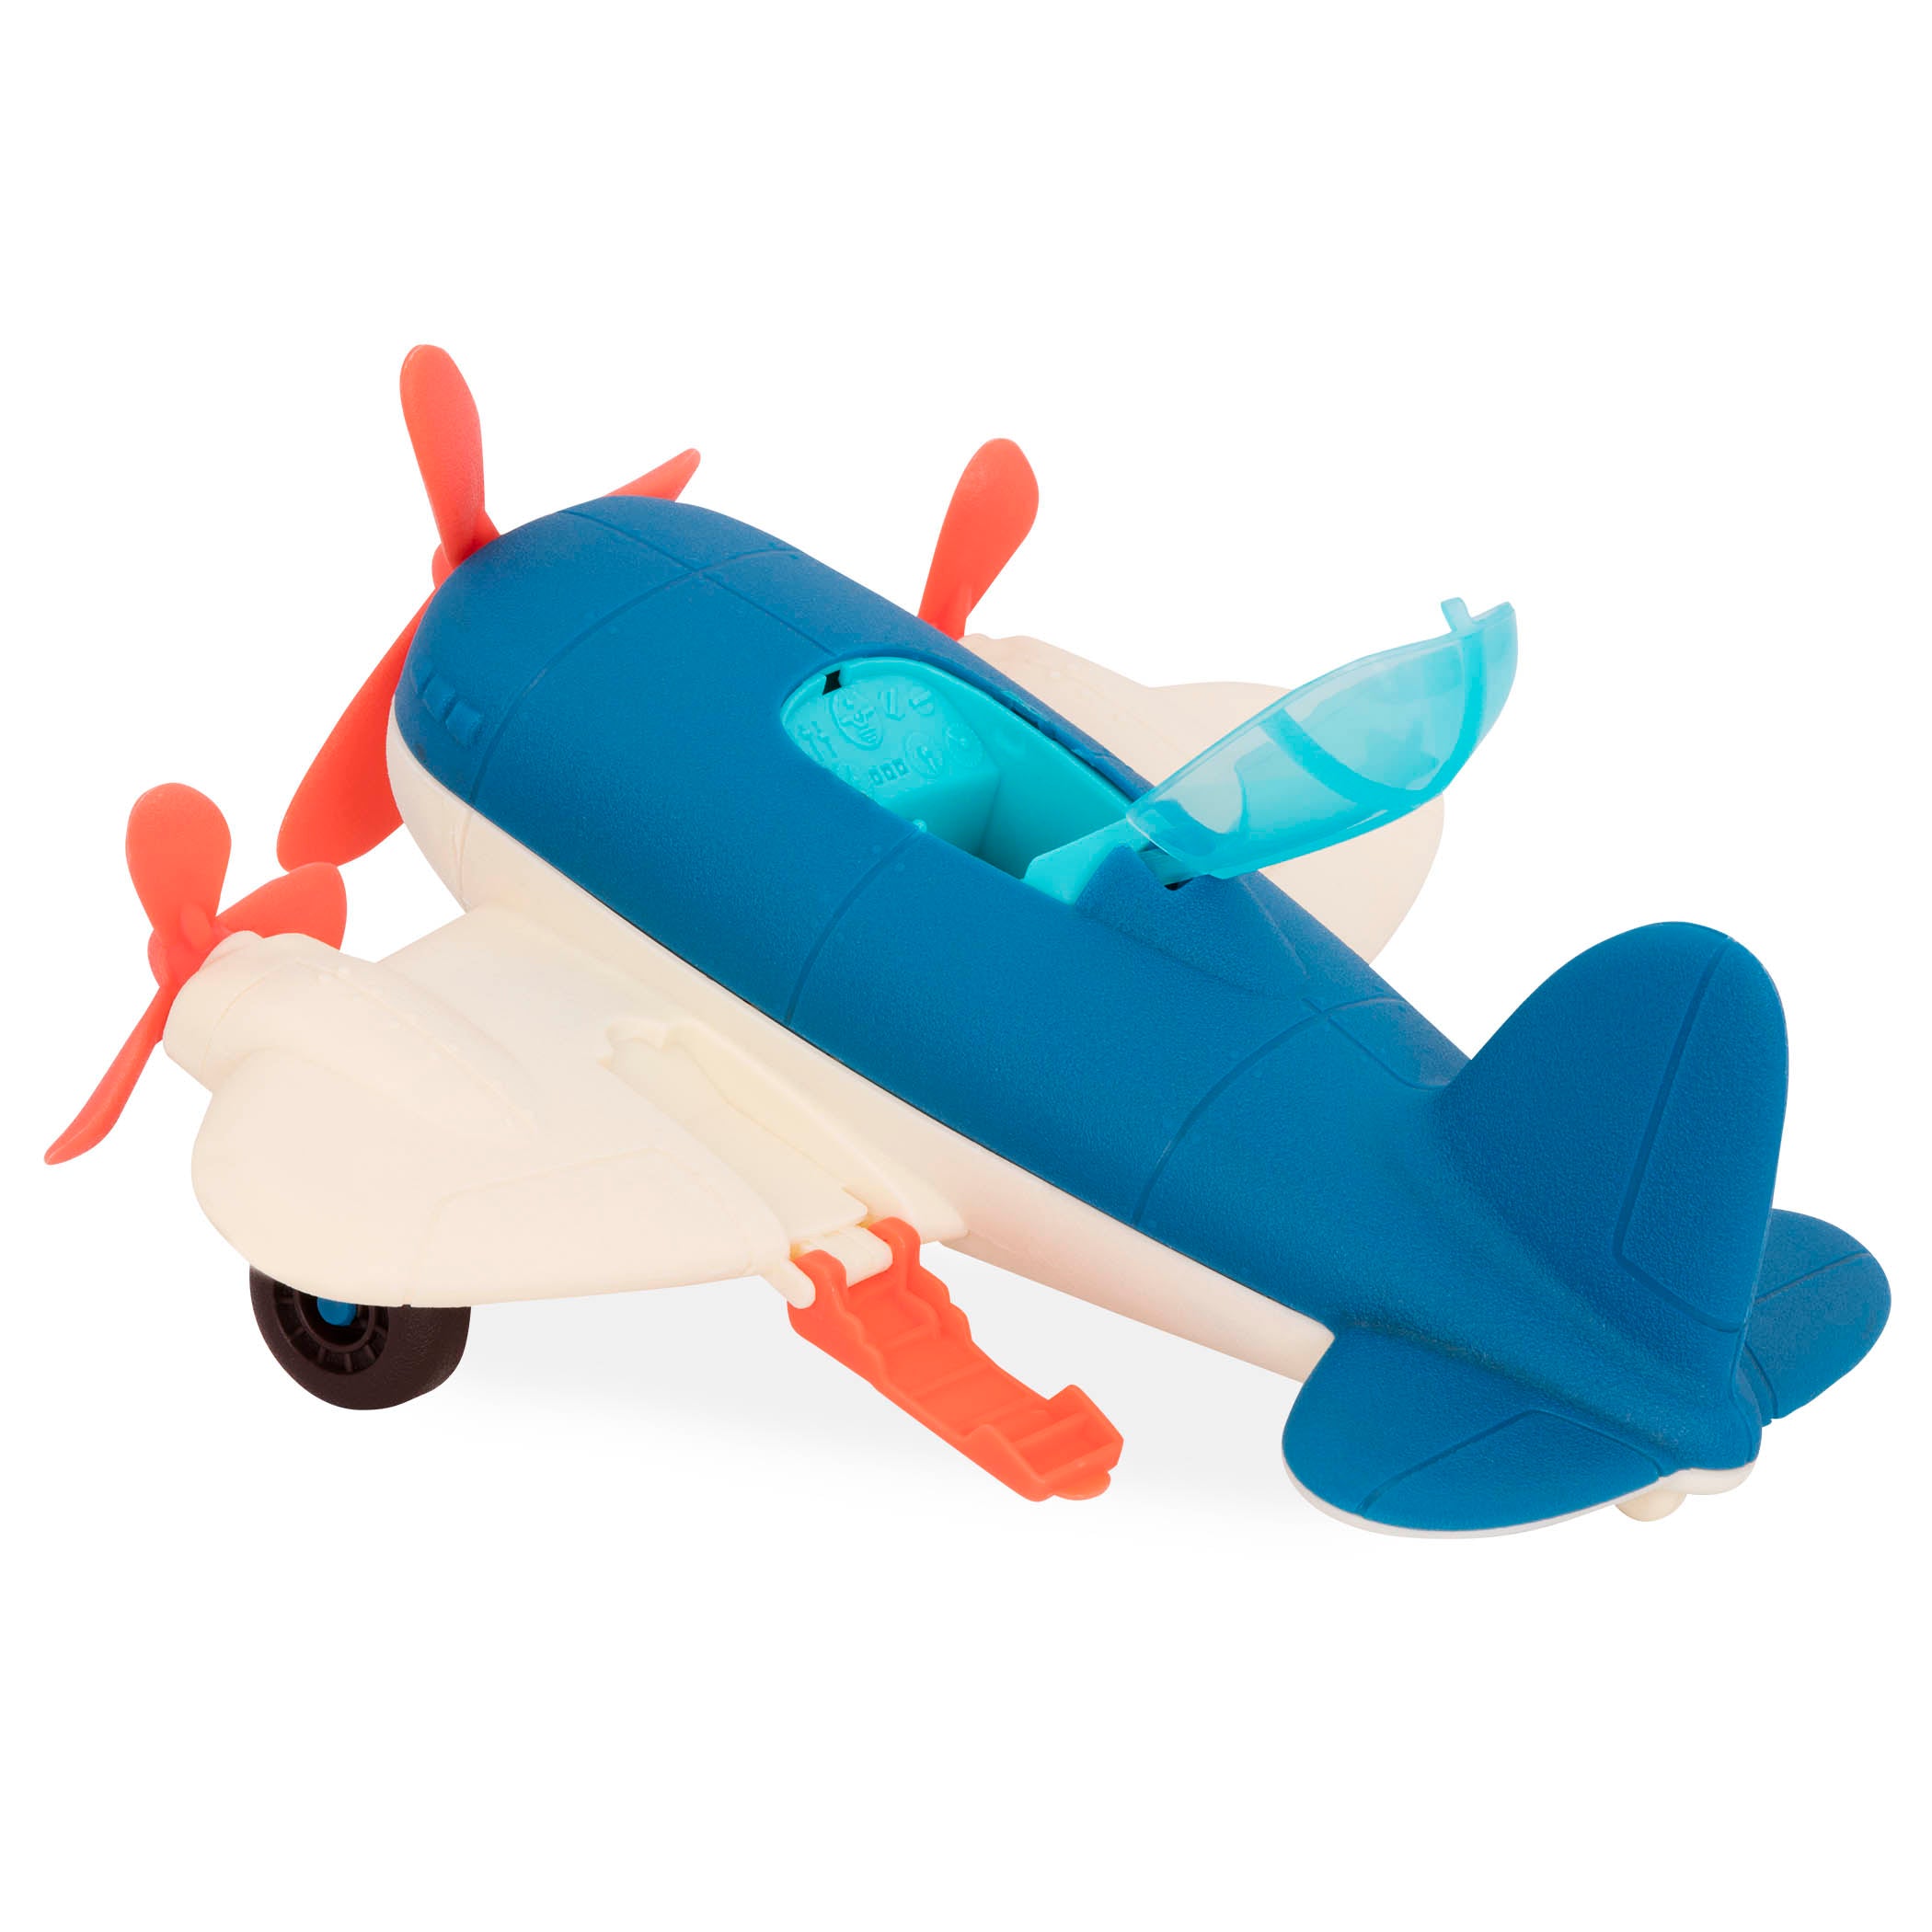 Toy airplane.